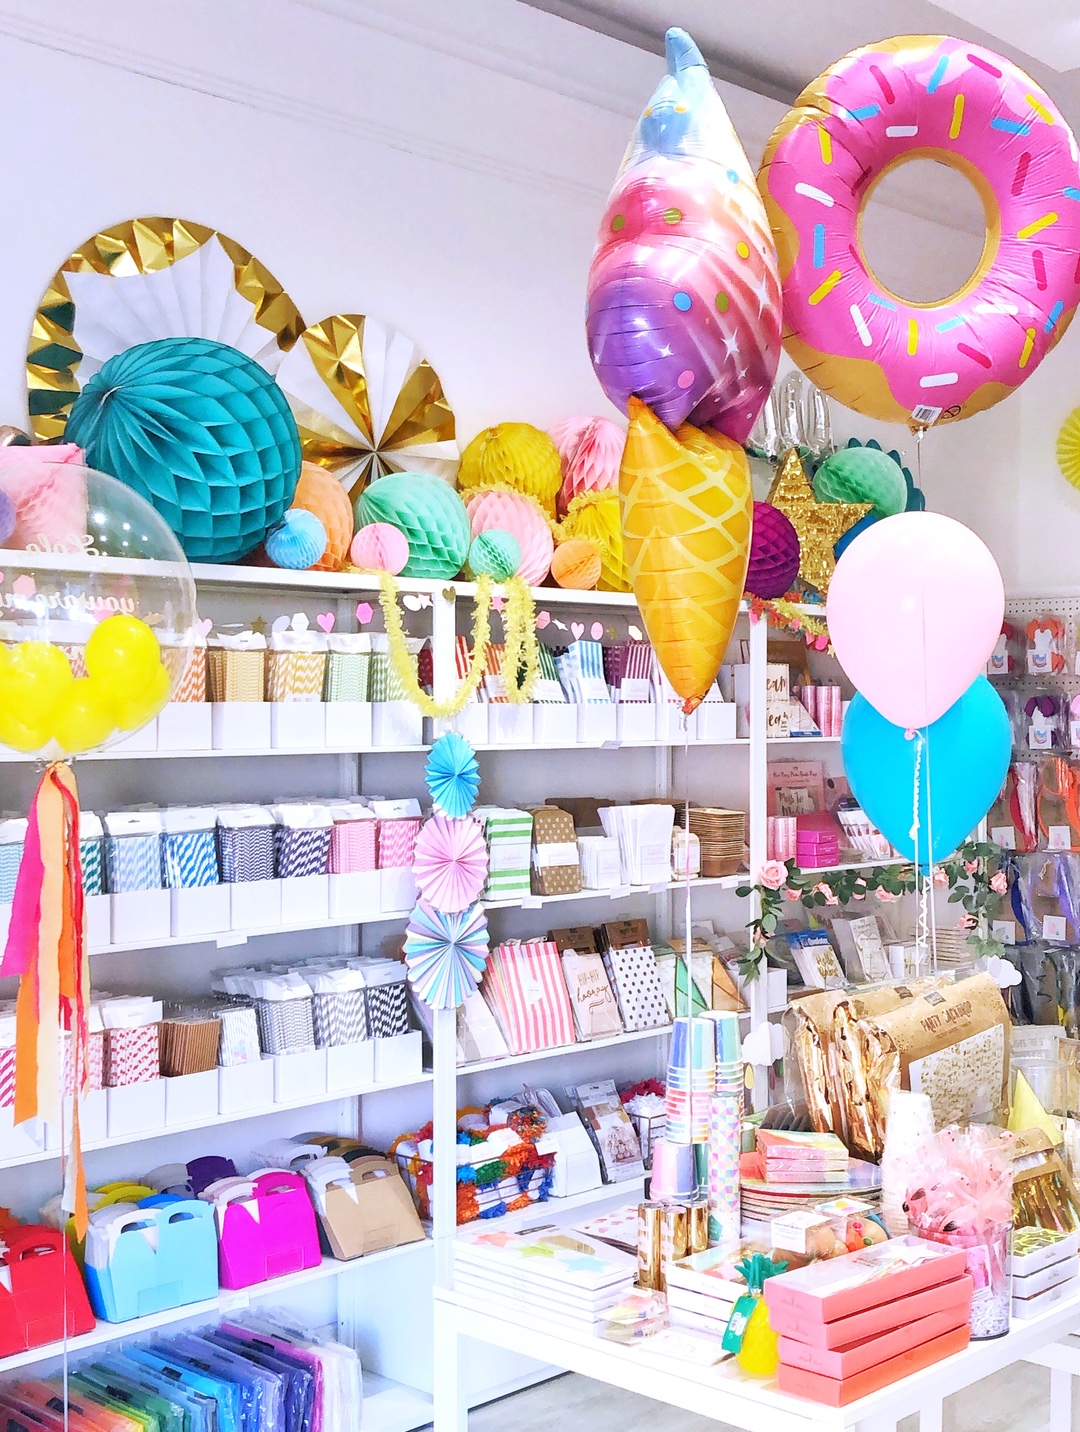 Brighton Party Shop Visit Our Balloon Bar Buy Stylish Party Decorations Party Bags Hats Candles And More